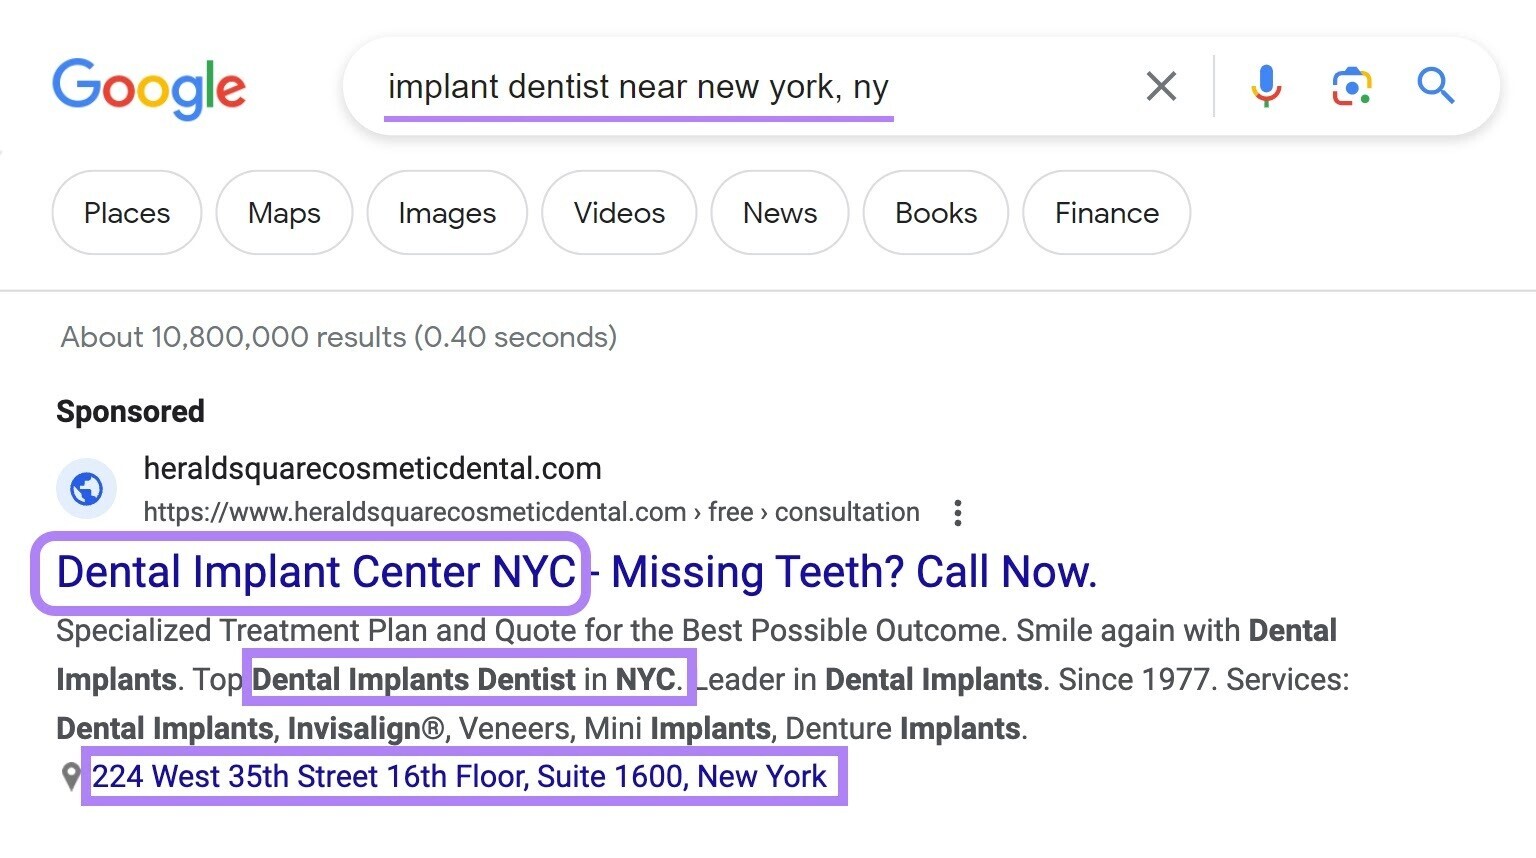 Herald Square Dental paid ad ranks on the first place for “implant dentist near new york, ny" query